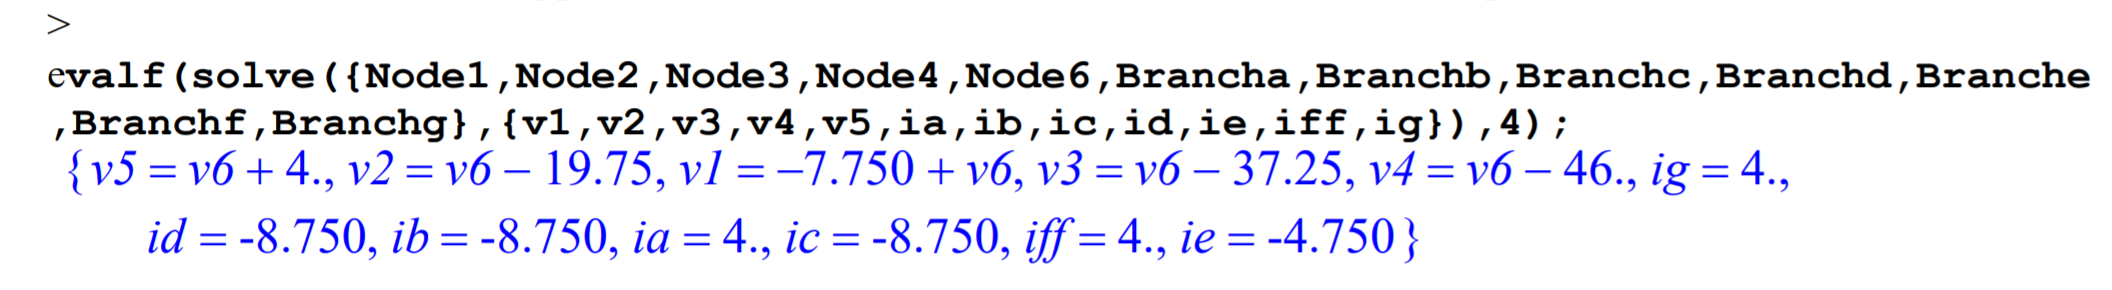 Code from the previous figure is repeated, except for the omission of v6 from the variable list and the omission of GROUND from the conditions list. Solutions returned by the program are numerical for branch currents but are in terms of v6 for all node voltages.